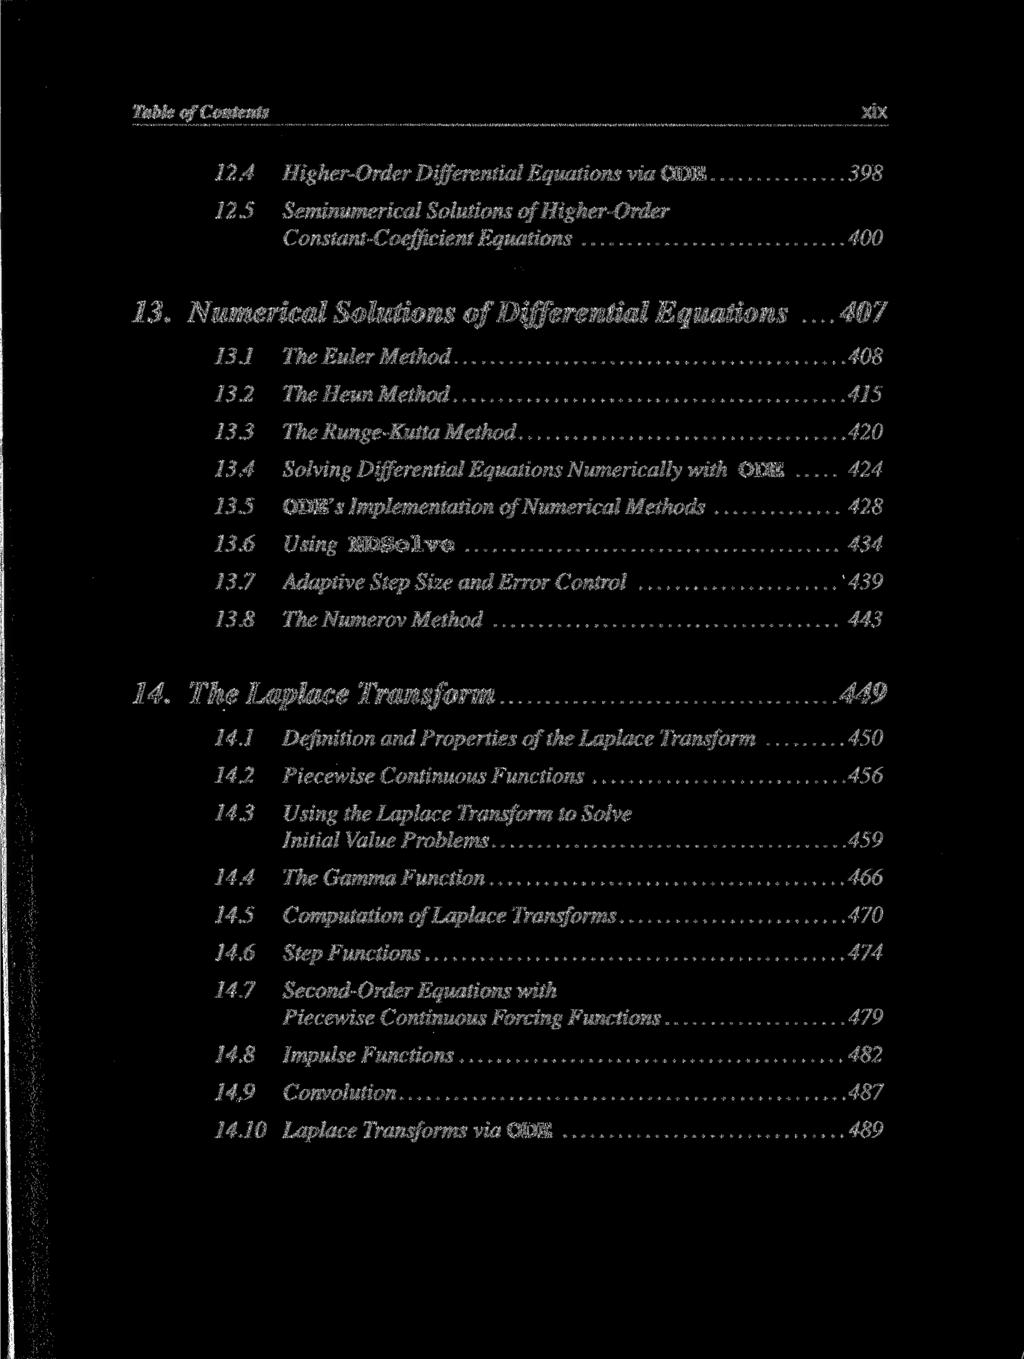 Table of Contents xix 12.4 Higher-Order Differential Equations via ODE 398 12.5 Seminumerical Solutions of Higher-Order Constant-Coefficient Equations 400 13.